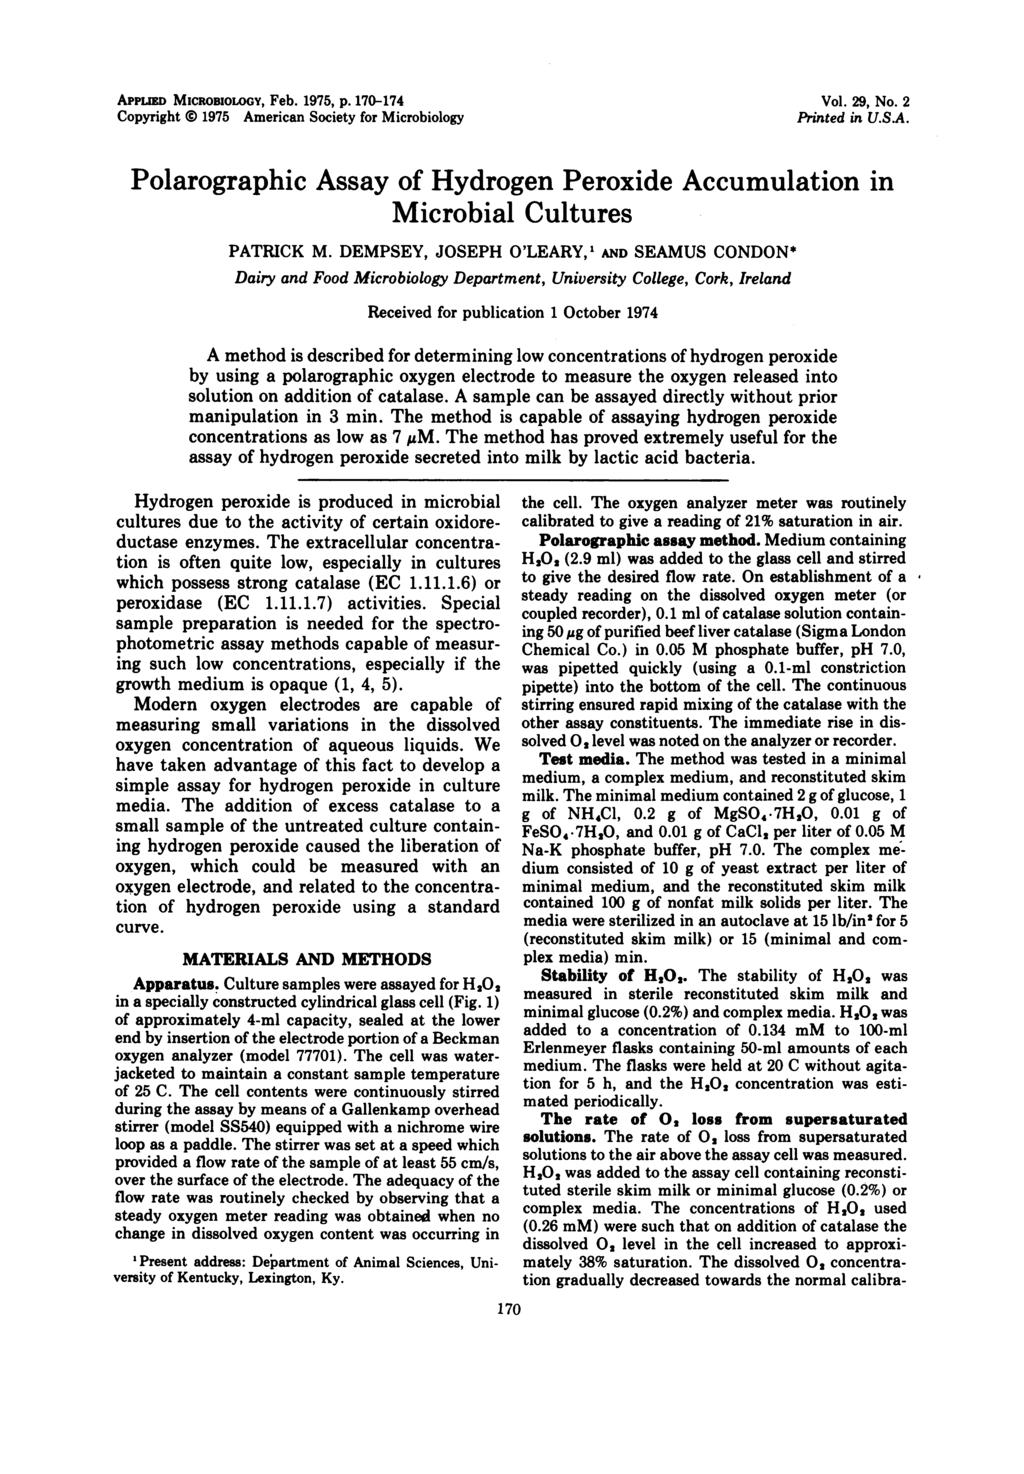 AppuLE MICROBIOLOGY, Feb. 1975, p. 170-174 Copyright 0 1975 American Society for Microbiology Vol. 29, No. 2 Printed in U.S.A. Polarographic Assay of Hydrogen Peroxide Accumulation in Microbial Cultures PATRICK M.